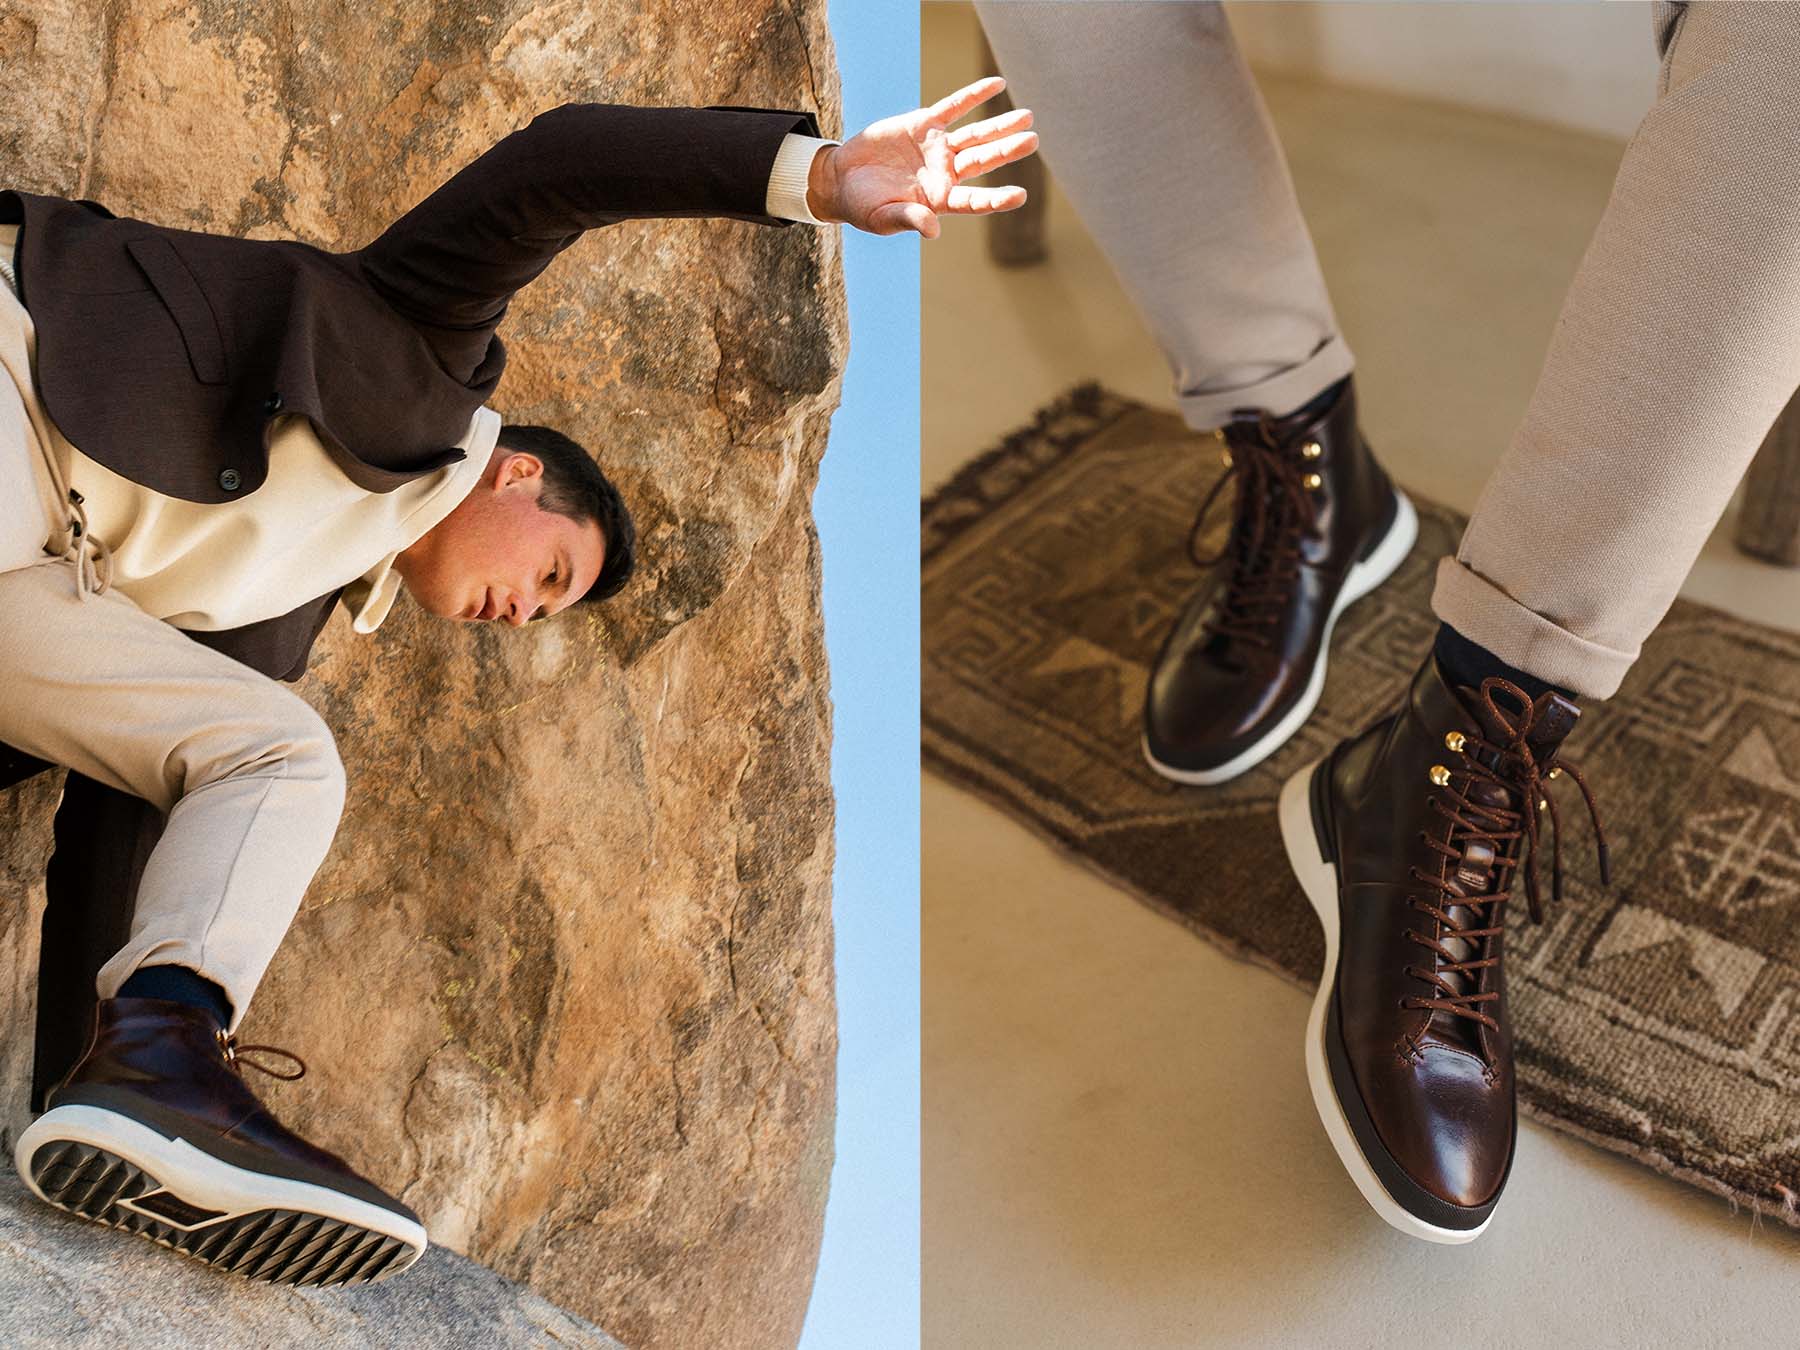 Two images side by side. Image on the left : Man jumping wearing boot Men's boot Crossover Hiker WTZ in maple , Image on the right: Knee down view of a man sitting wearing Men's boot Crossover Hiker WTZ in Maple